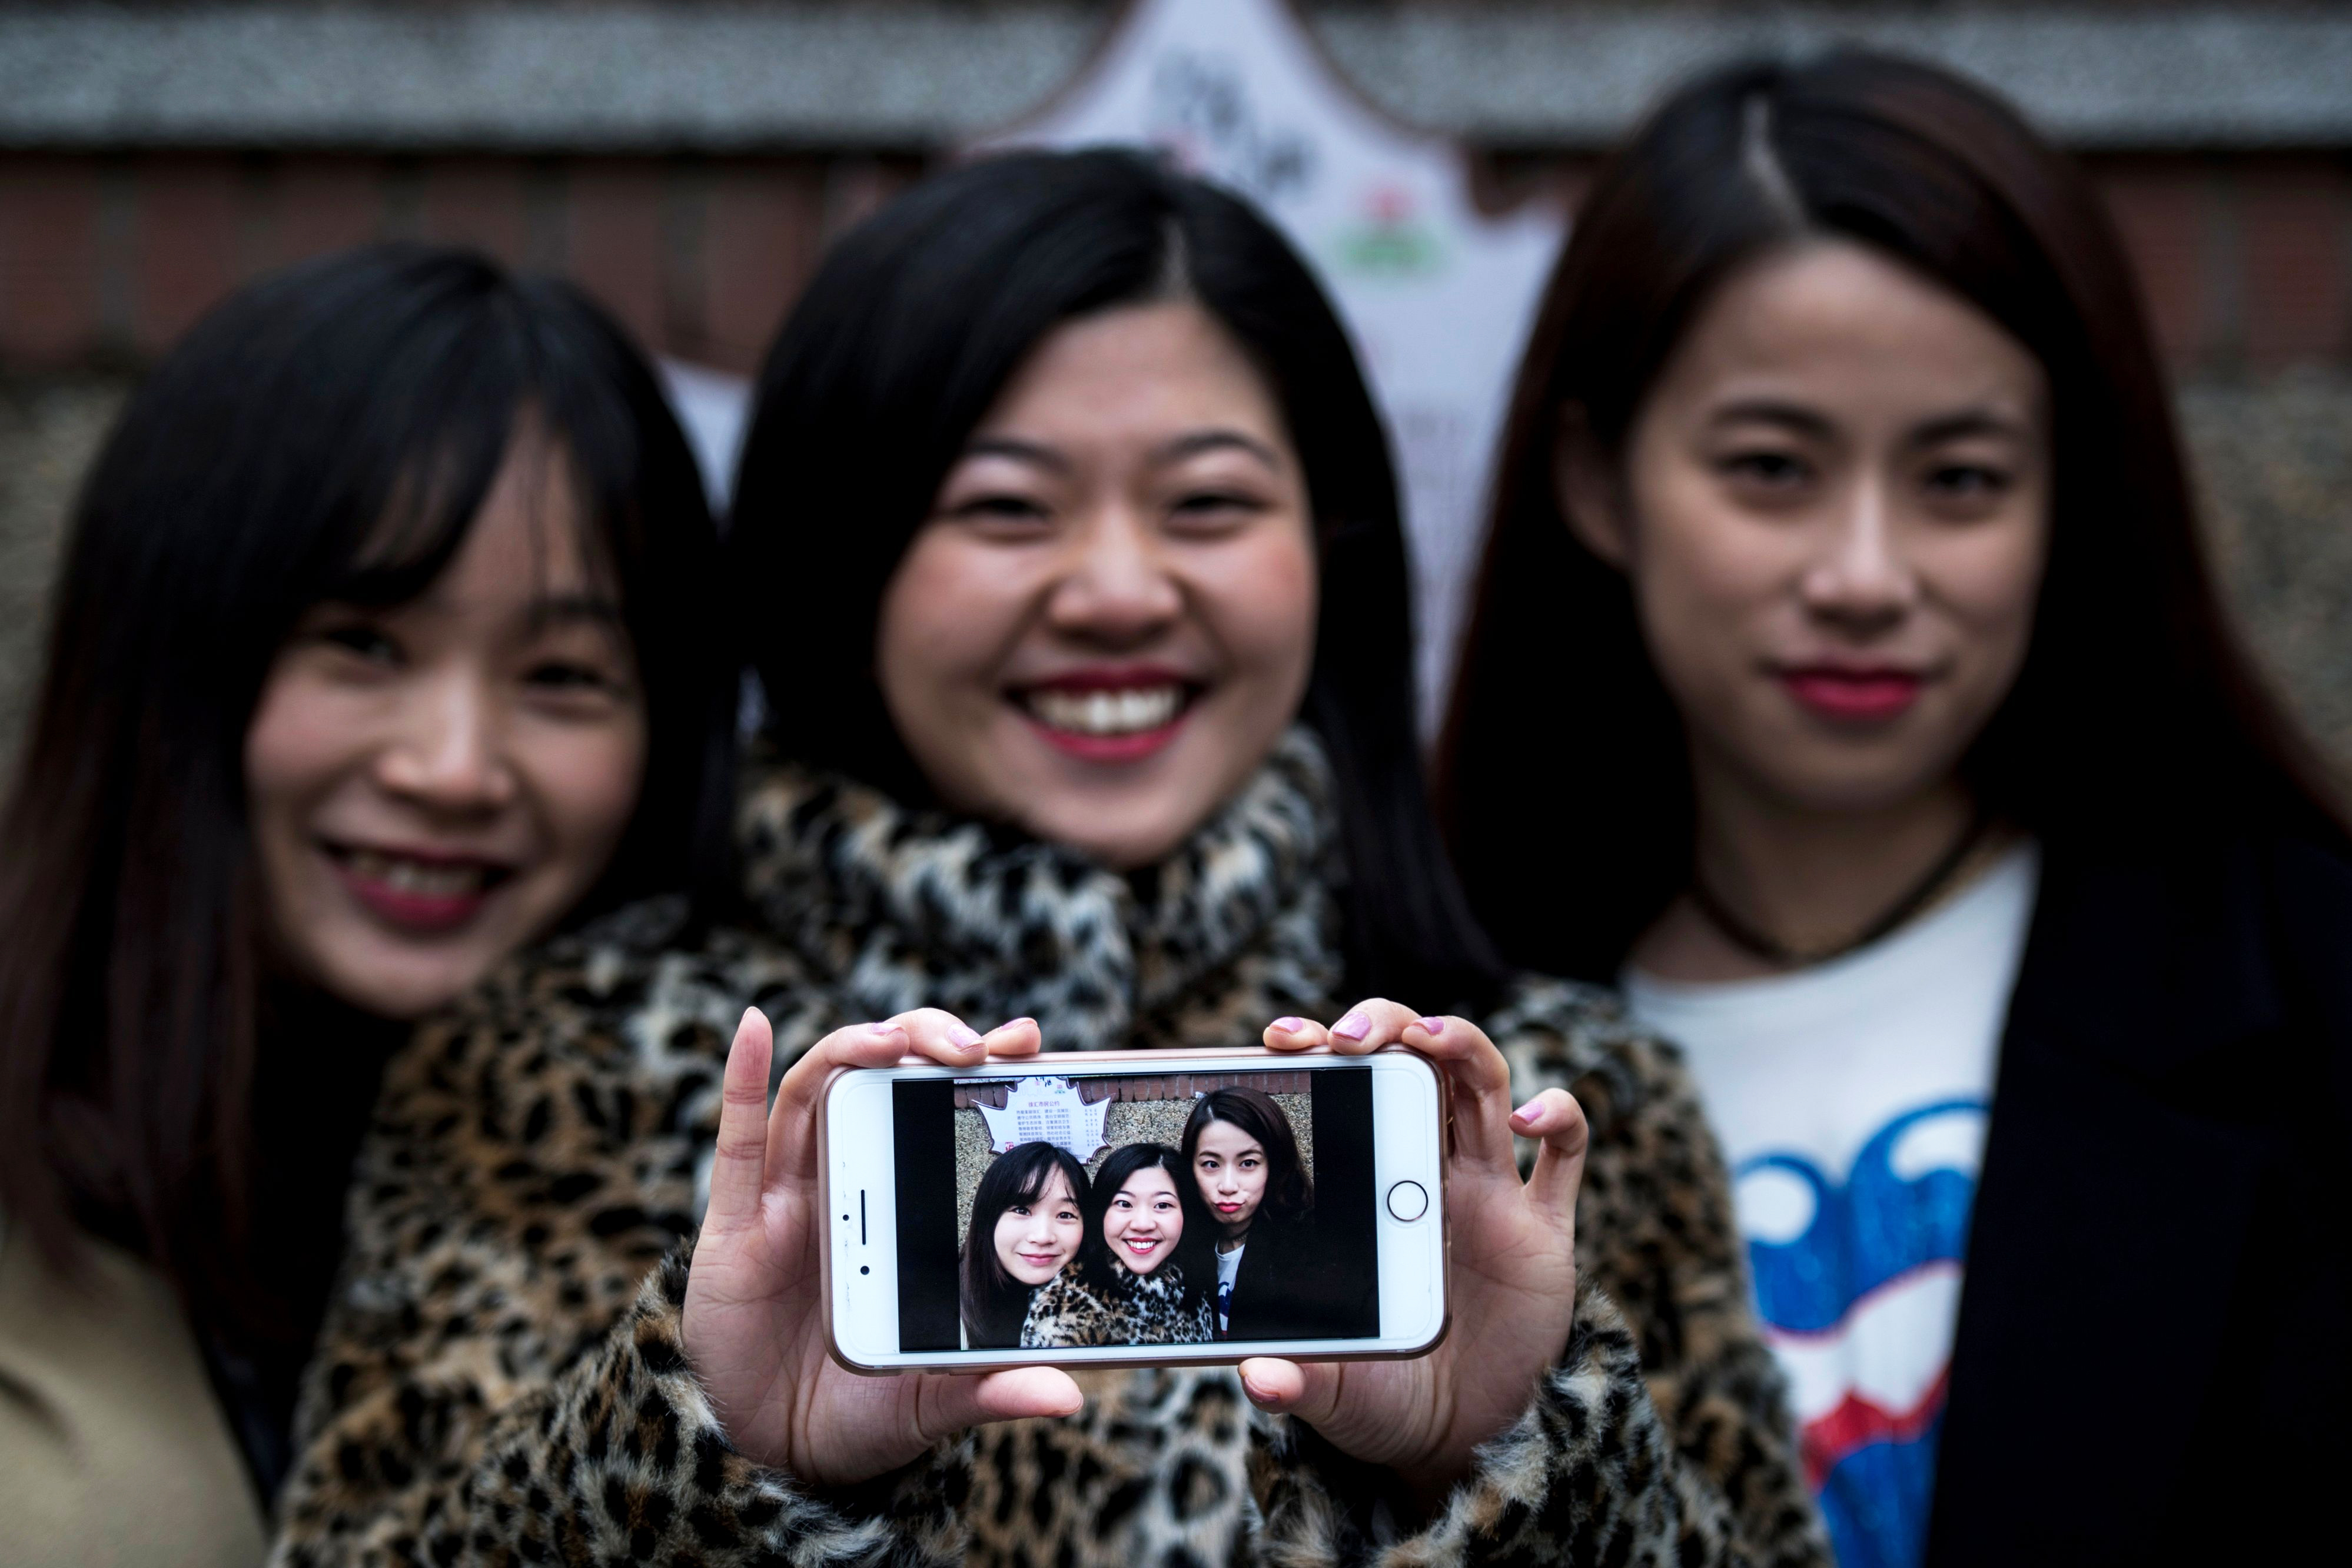 Many Chinese young women are obsessed with the beauty standards impersonated by web influencers (photo: Getty Images)